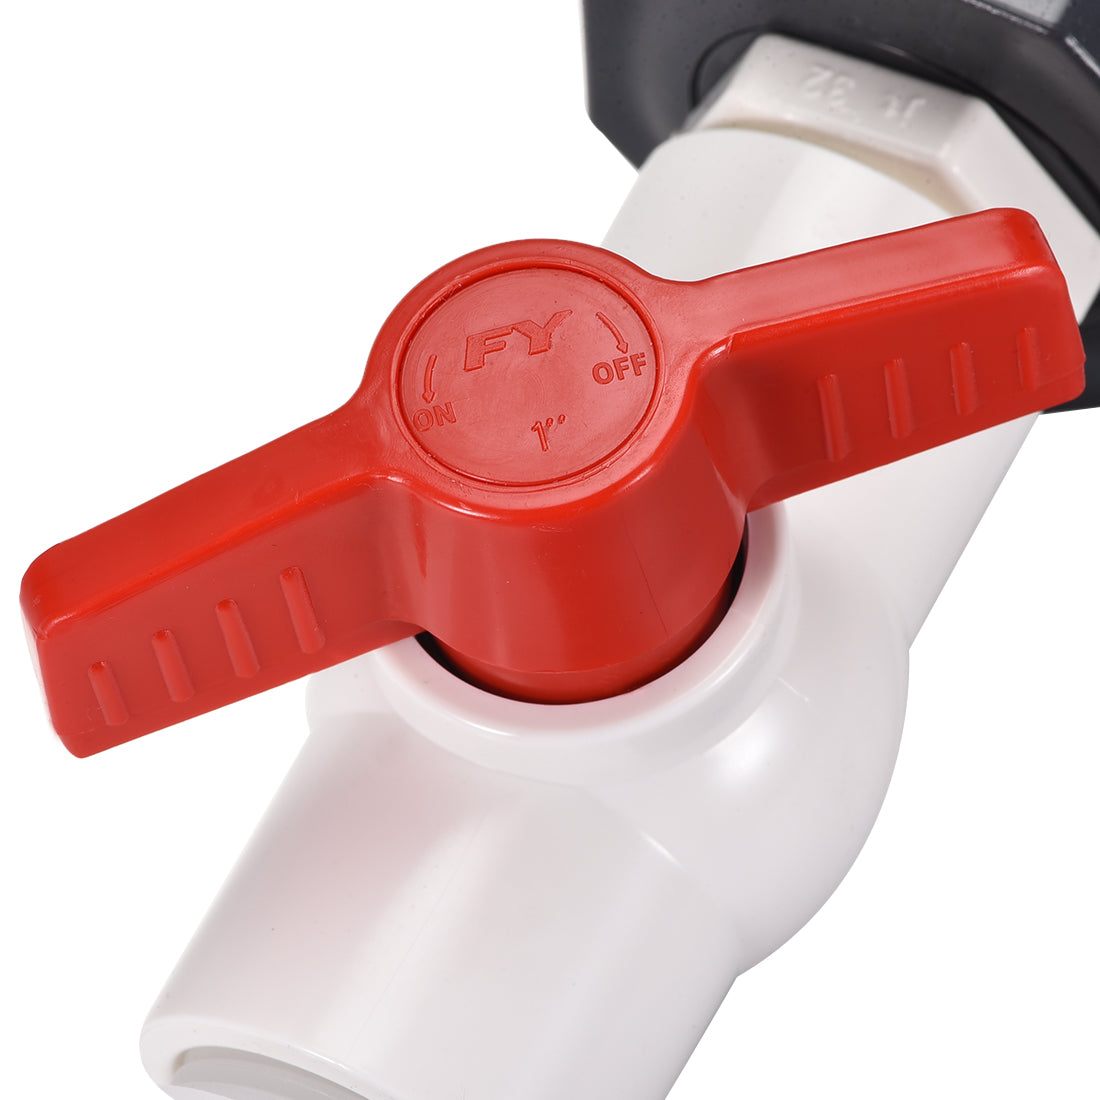 Uxcell Uxcell PVC Ball Valve Connector Spigot Kit G1 Lengthen, with Bulkhead, Grey White Red